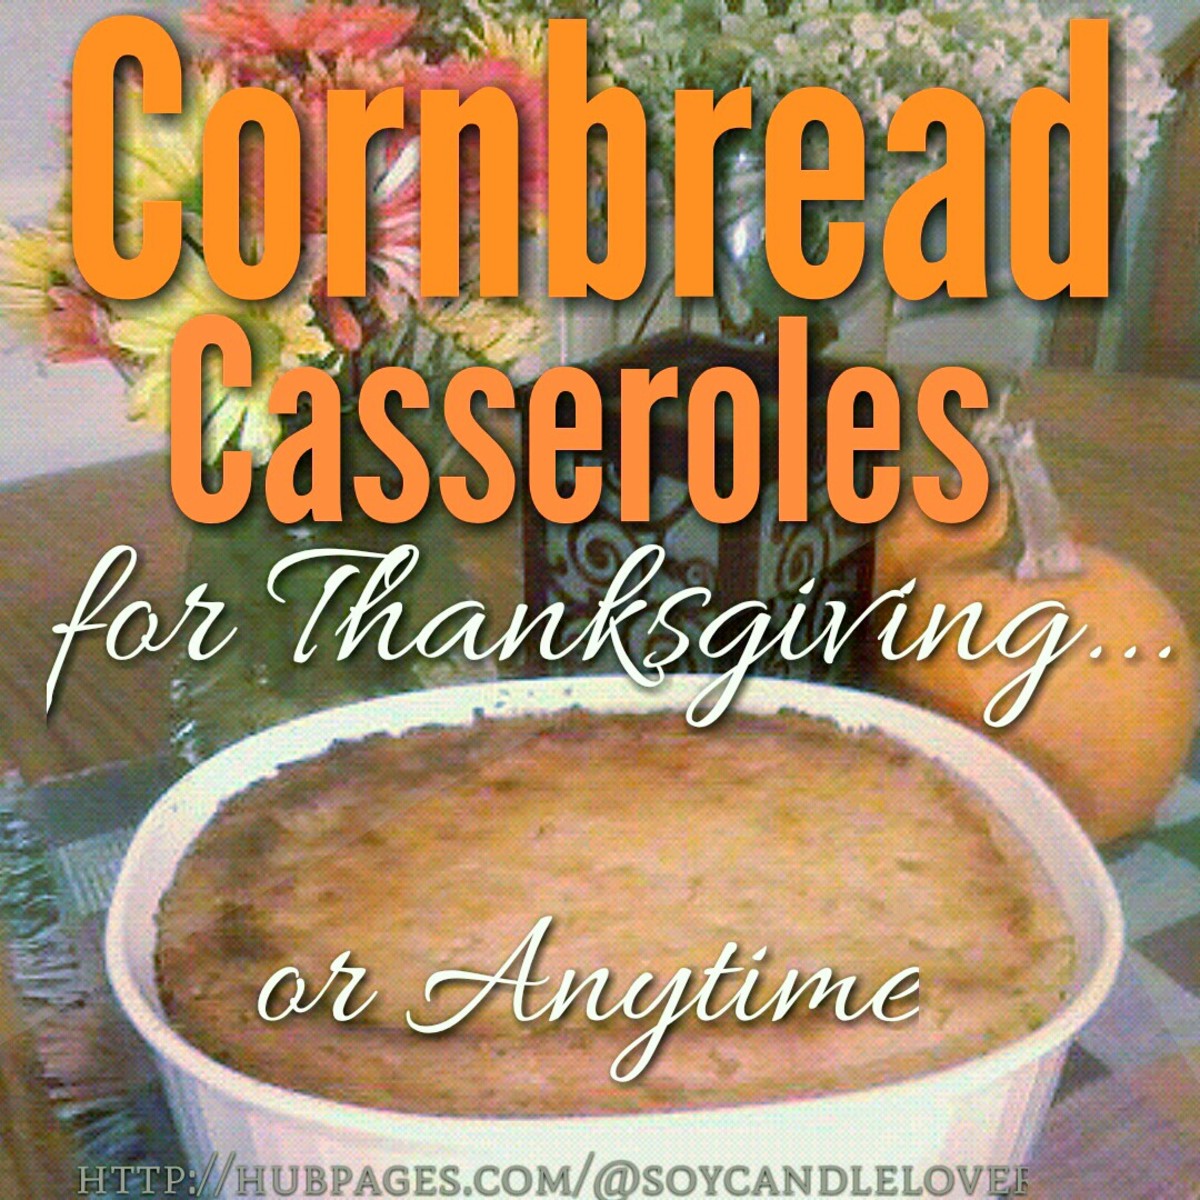 Cornbread Casseroles for Thanksgiving or Anytime